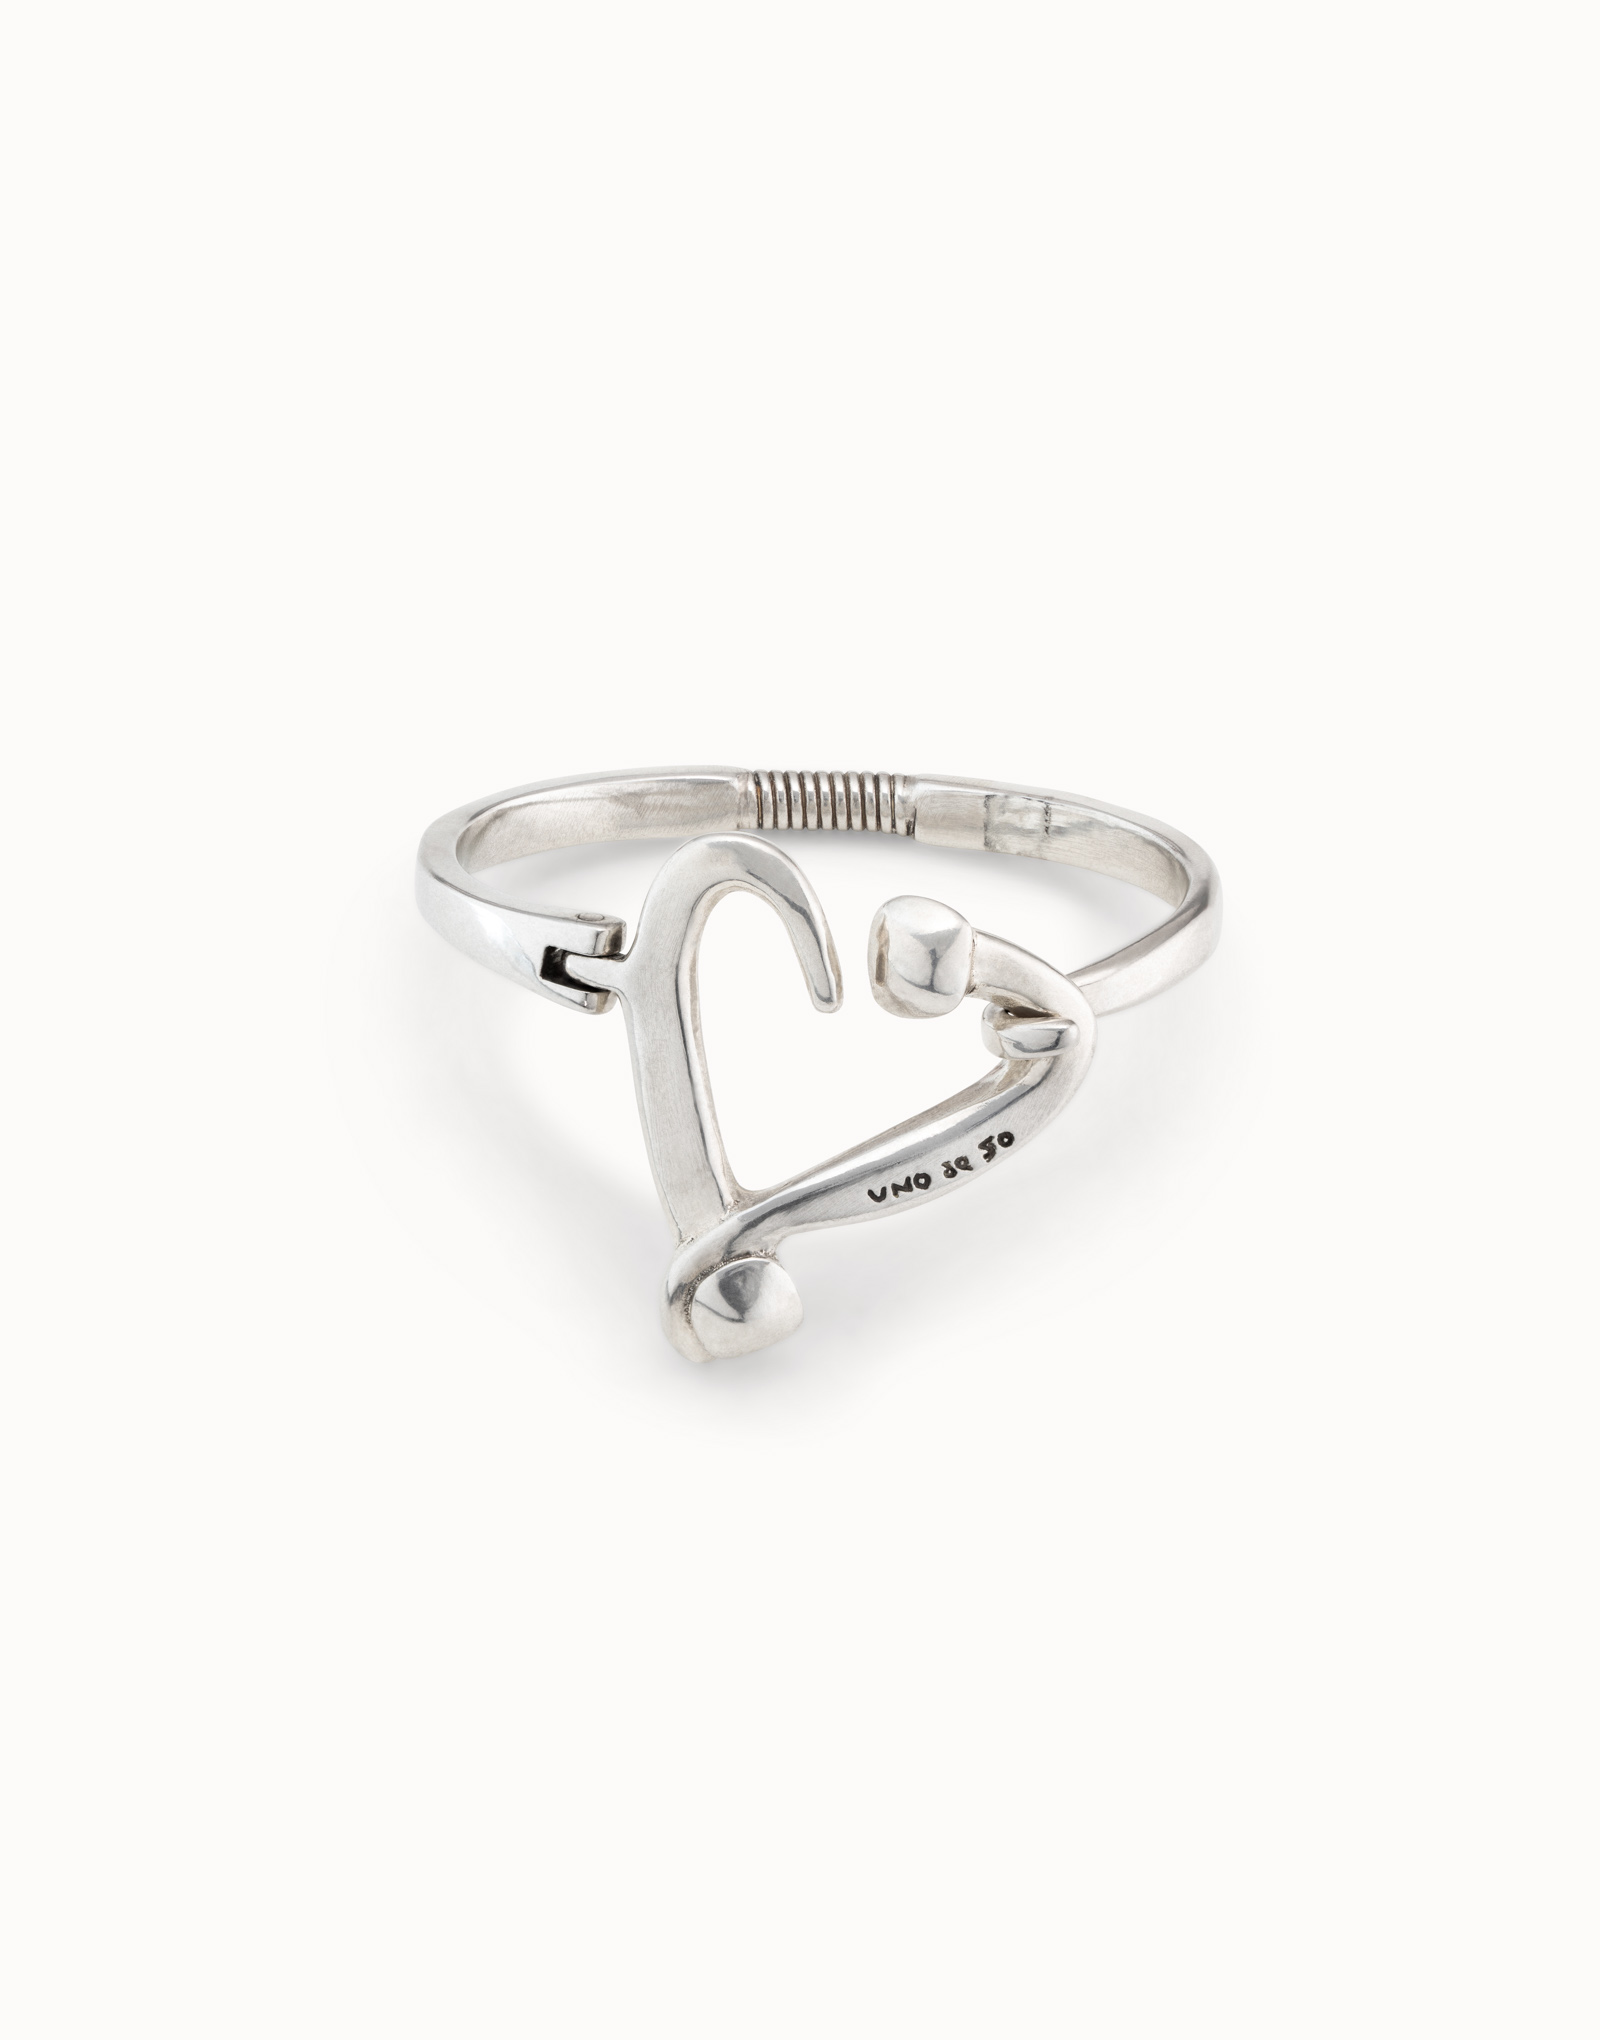 Bracciale placcato argento Sterling con cuore inchiodato, molla visibile, Argent, large image number null